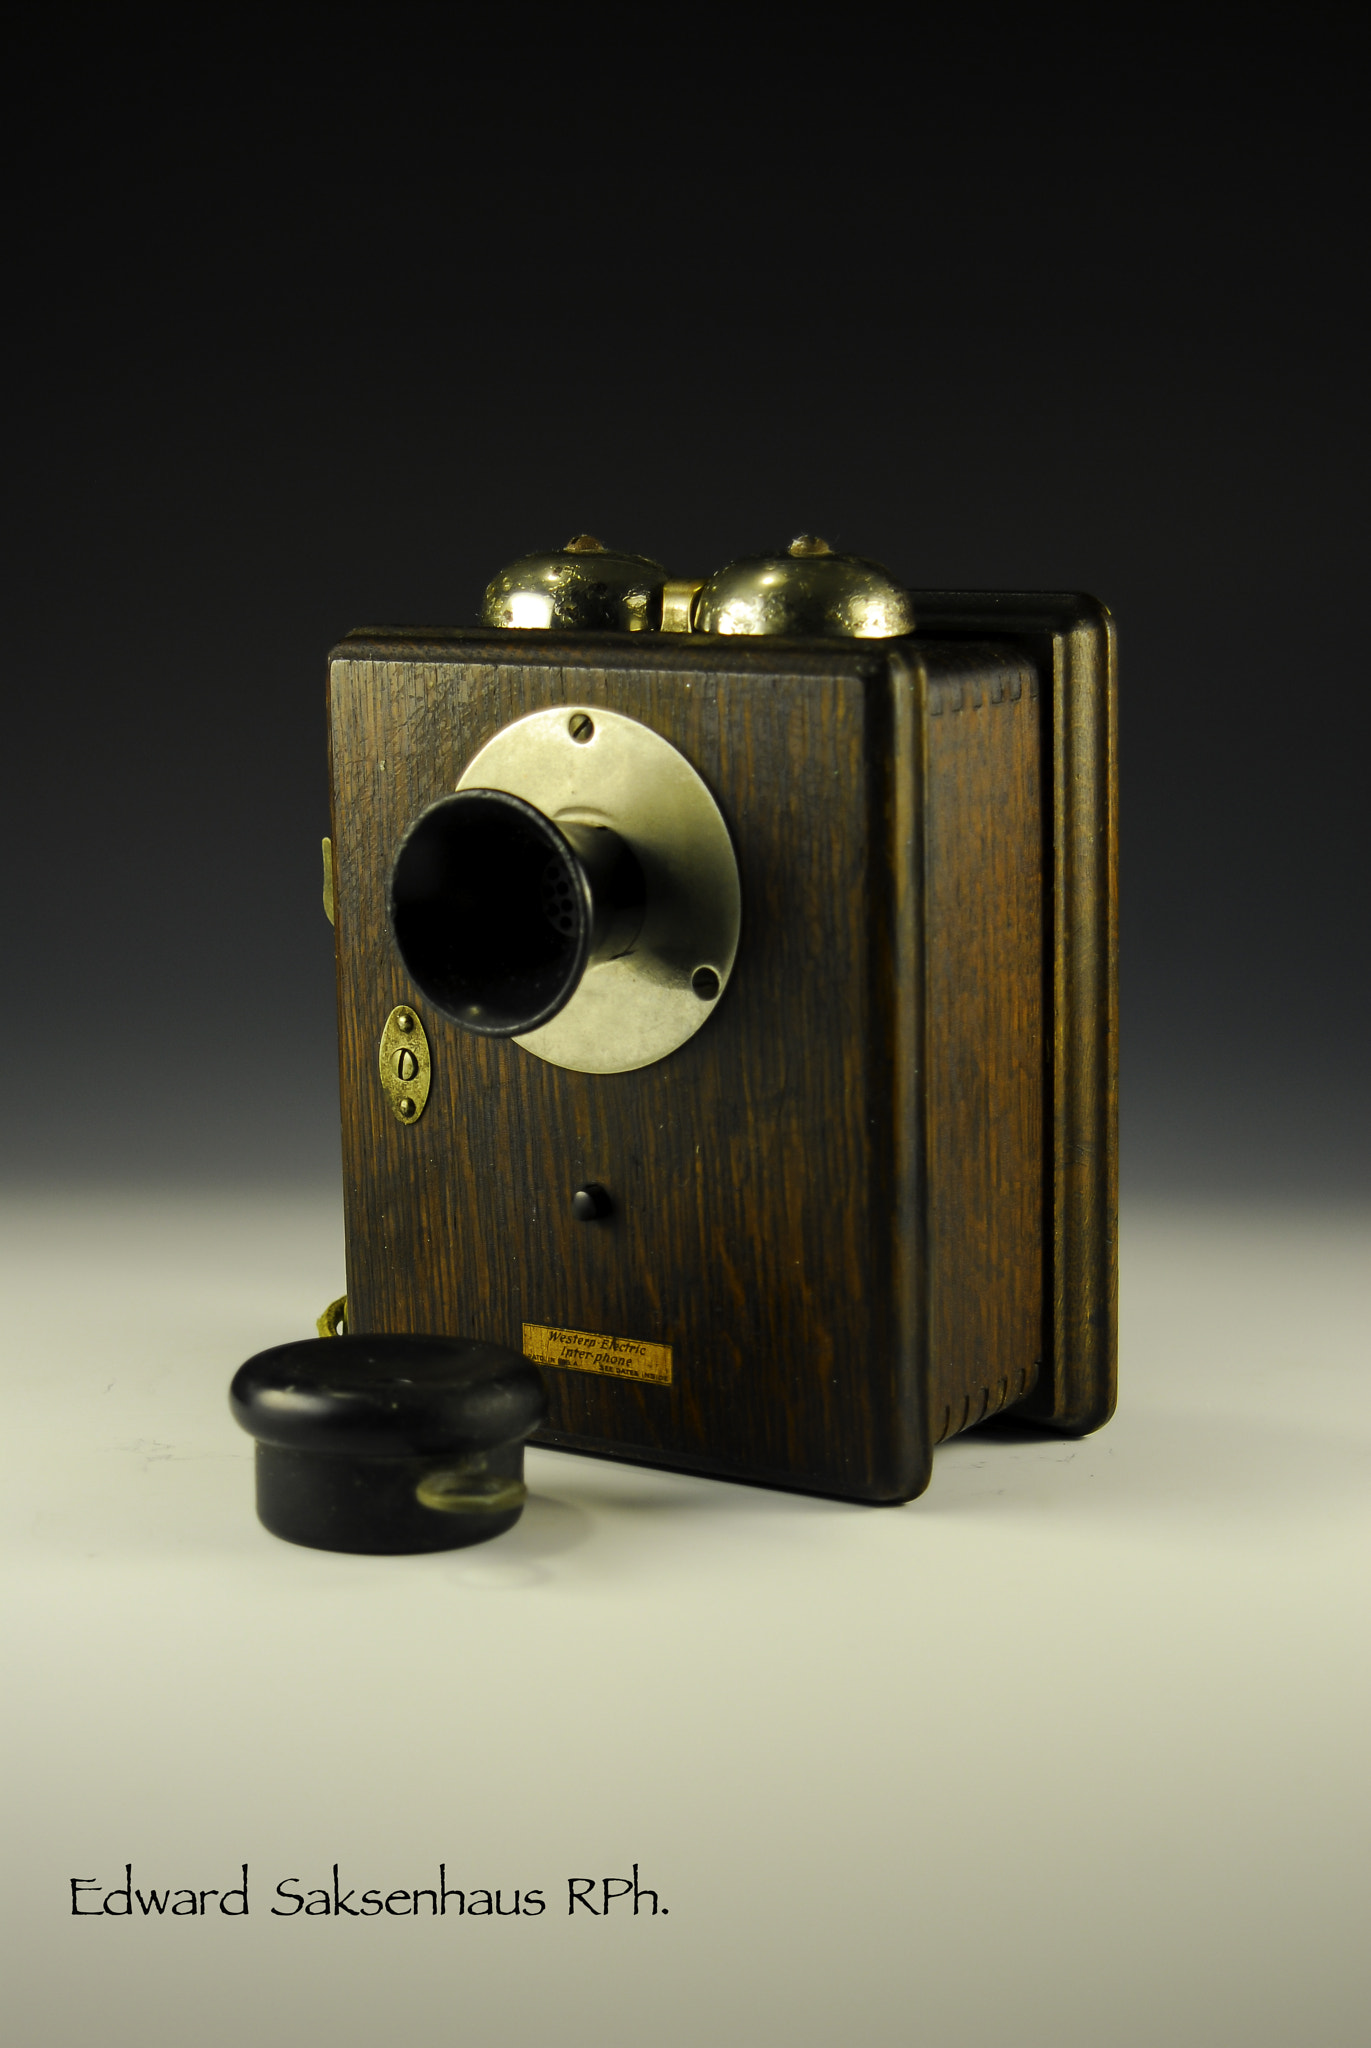 Nikon D200 sample photo. Early 1900 western electric phone from a chicago pharmacy photography